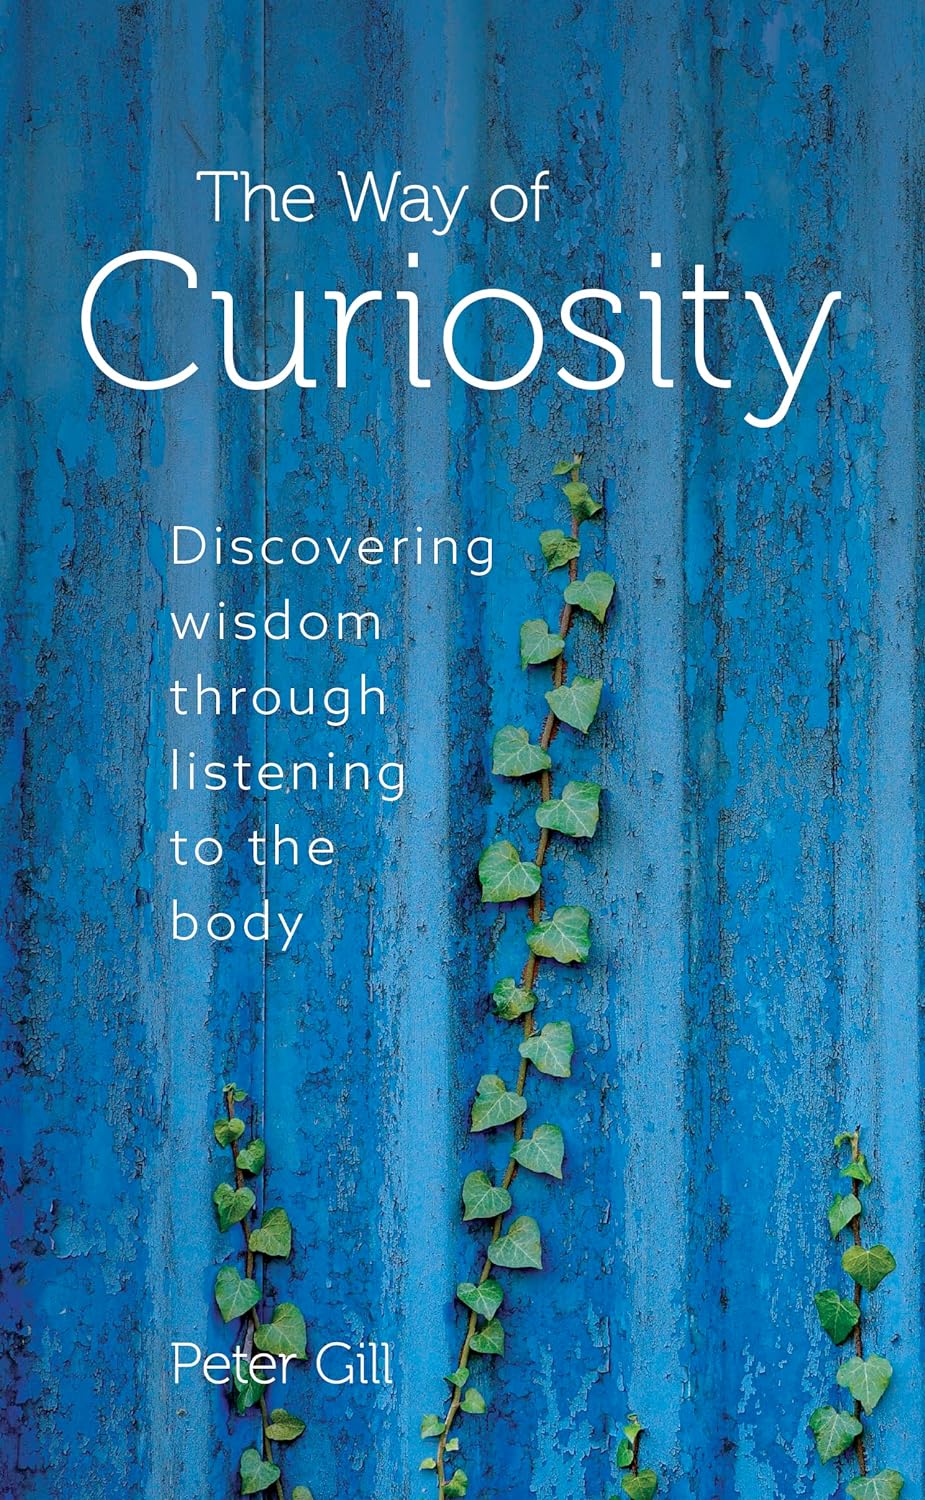 The Way of Curiosity : Discovering wisdom through listening to the body